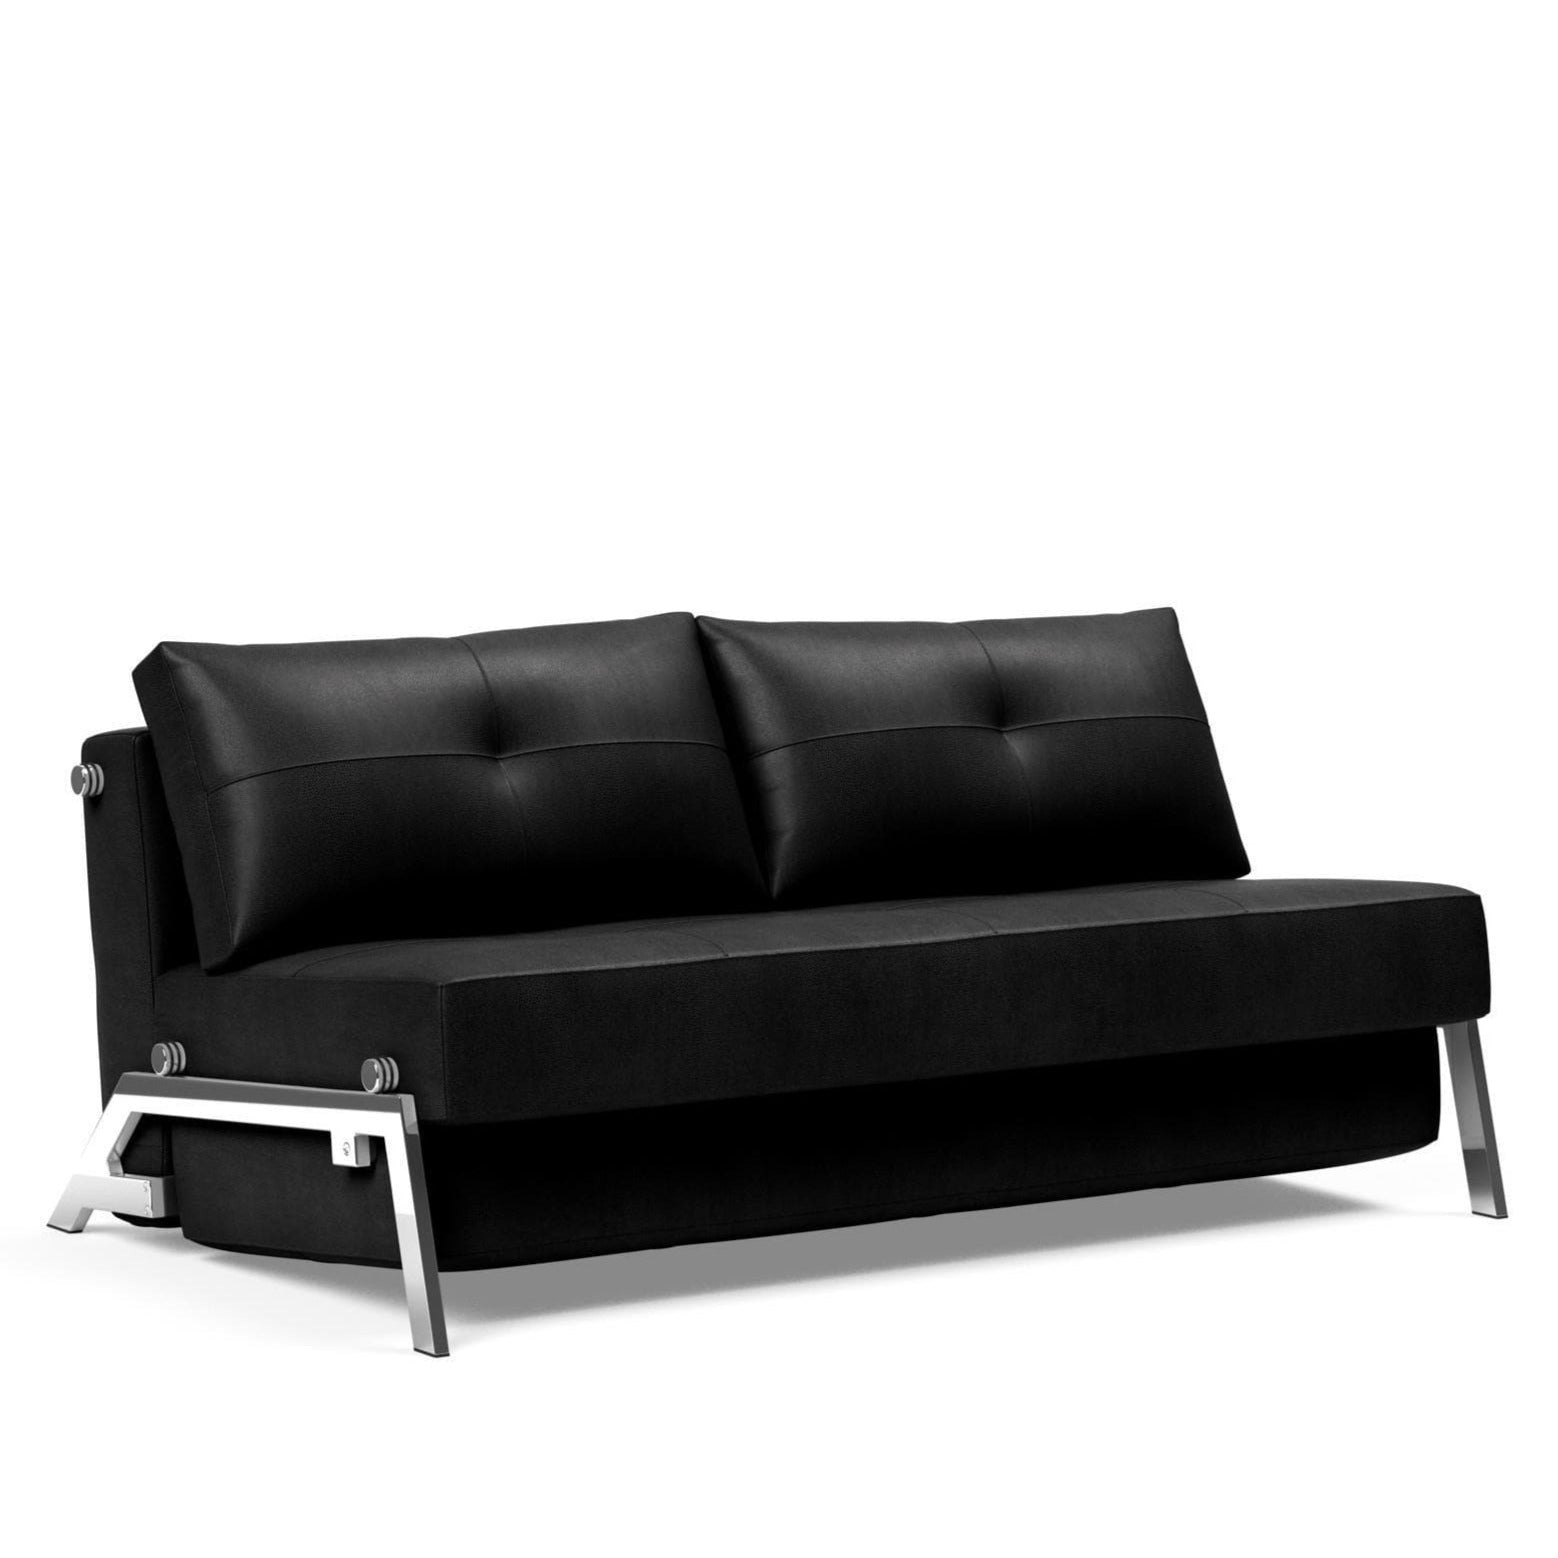 Innovation Queen Size Sofa Bed With Chrome Legs - New York